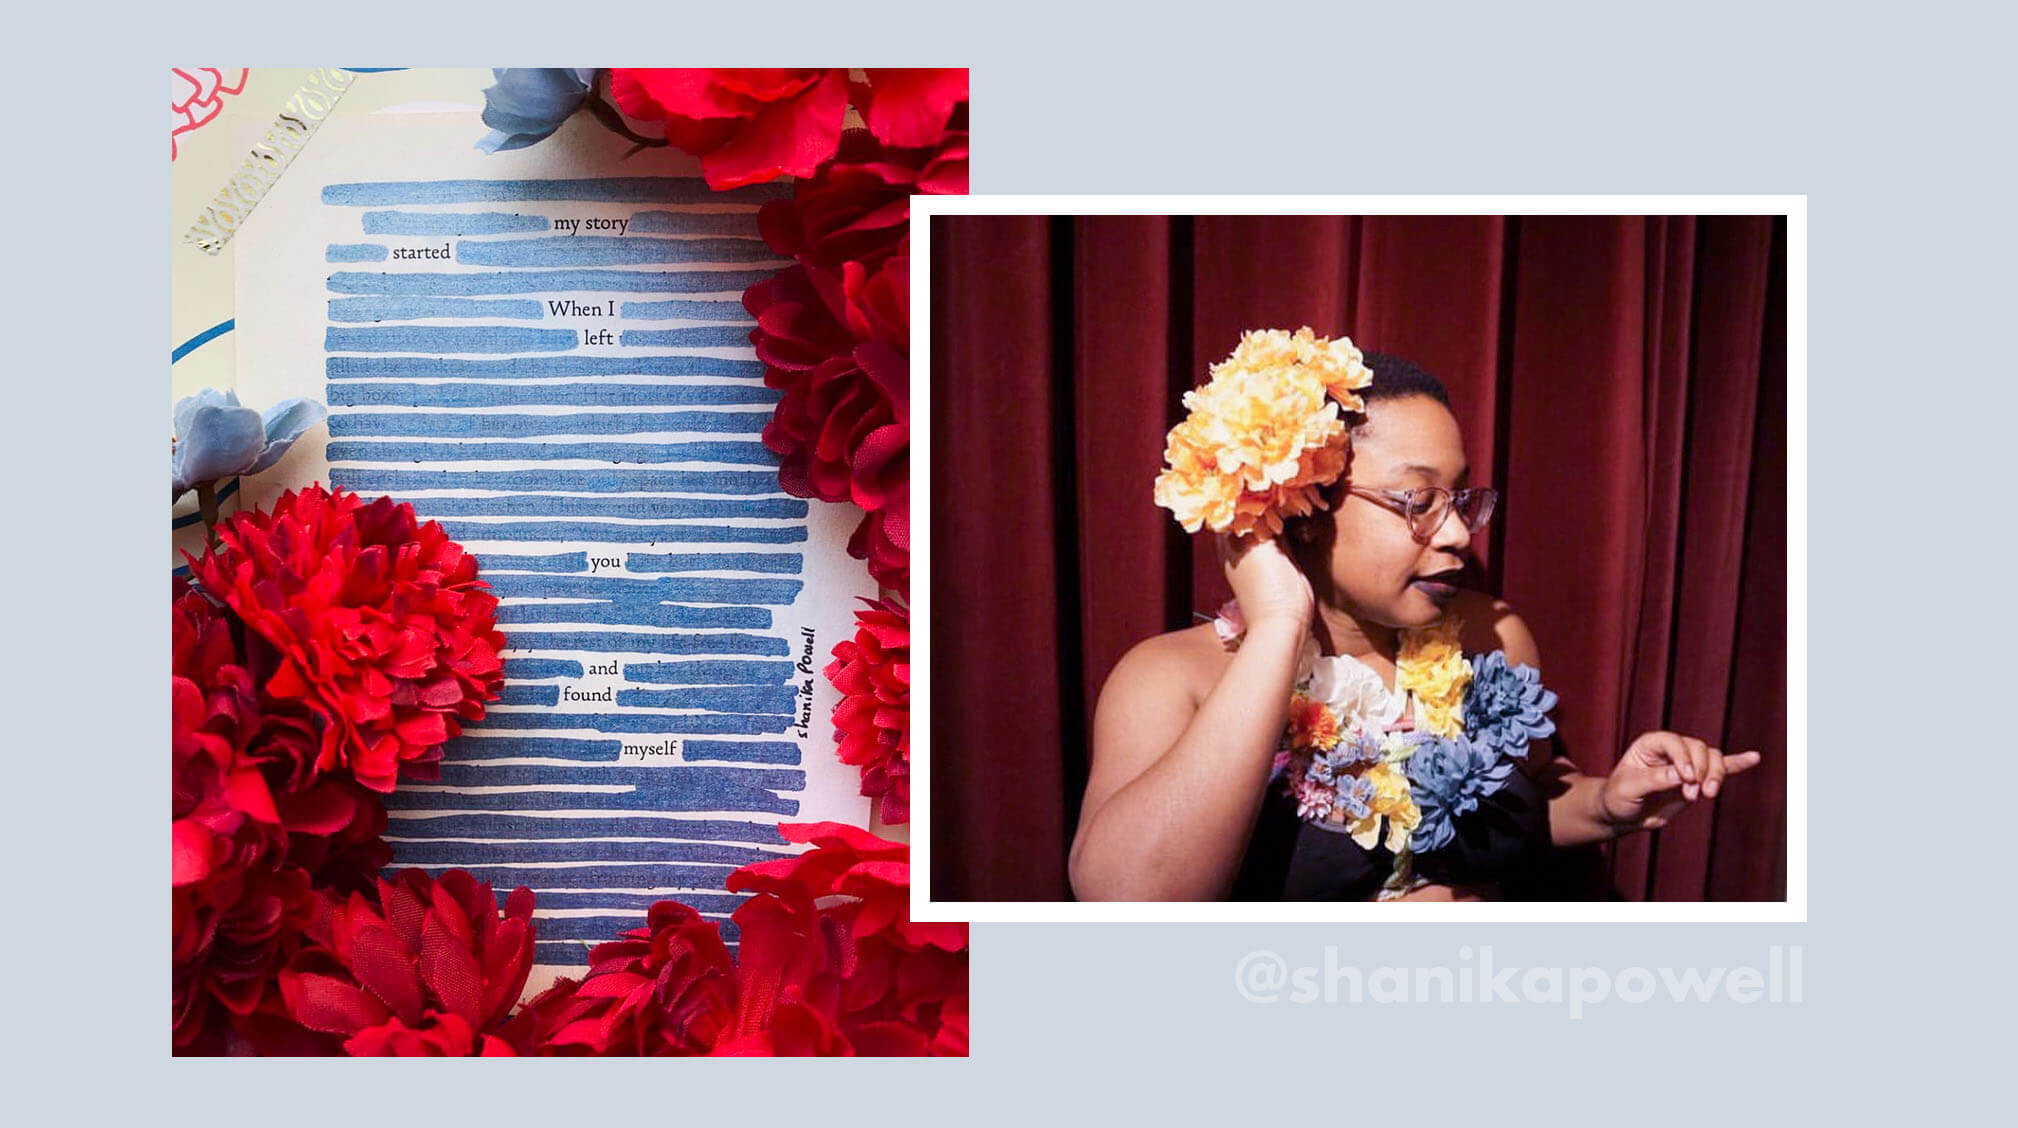 One Poet on Self-Acceptance Through Flowers